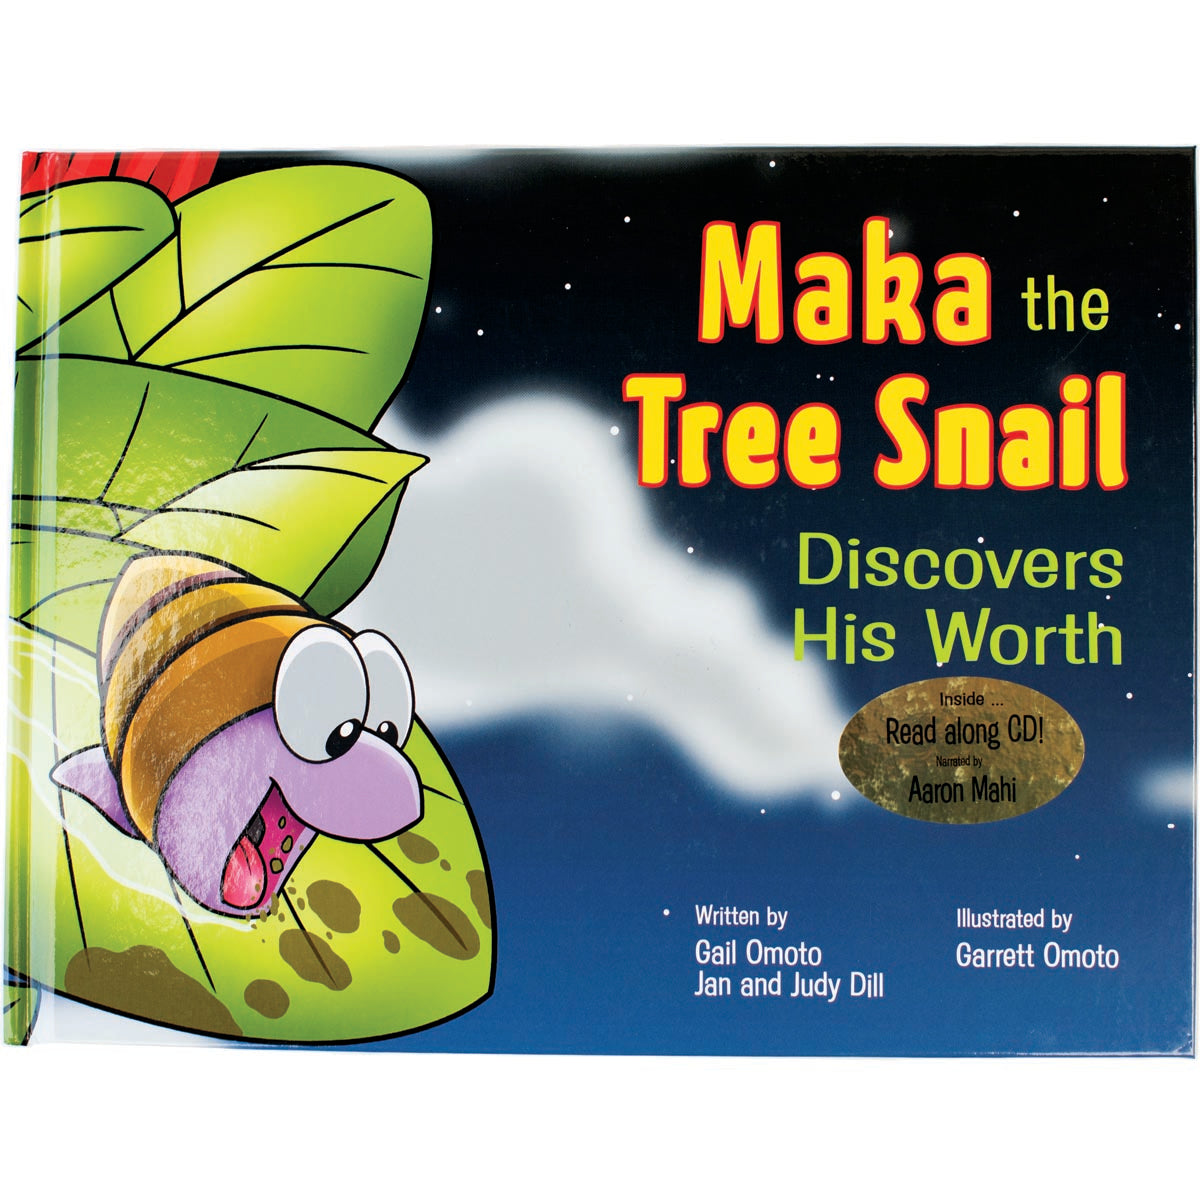 Maka the Tree Snail Discovers His Worth